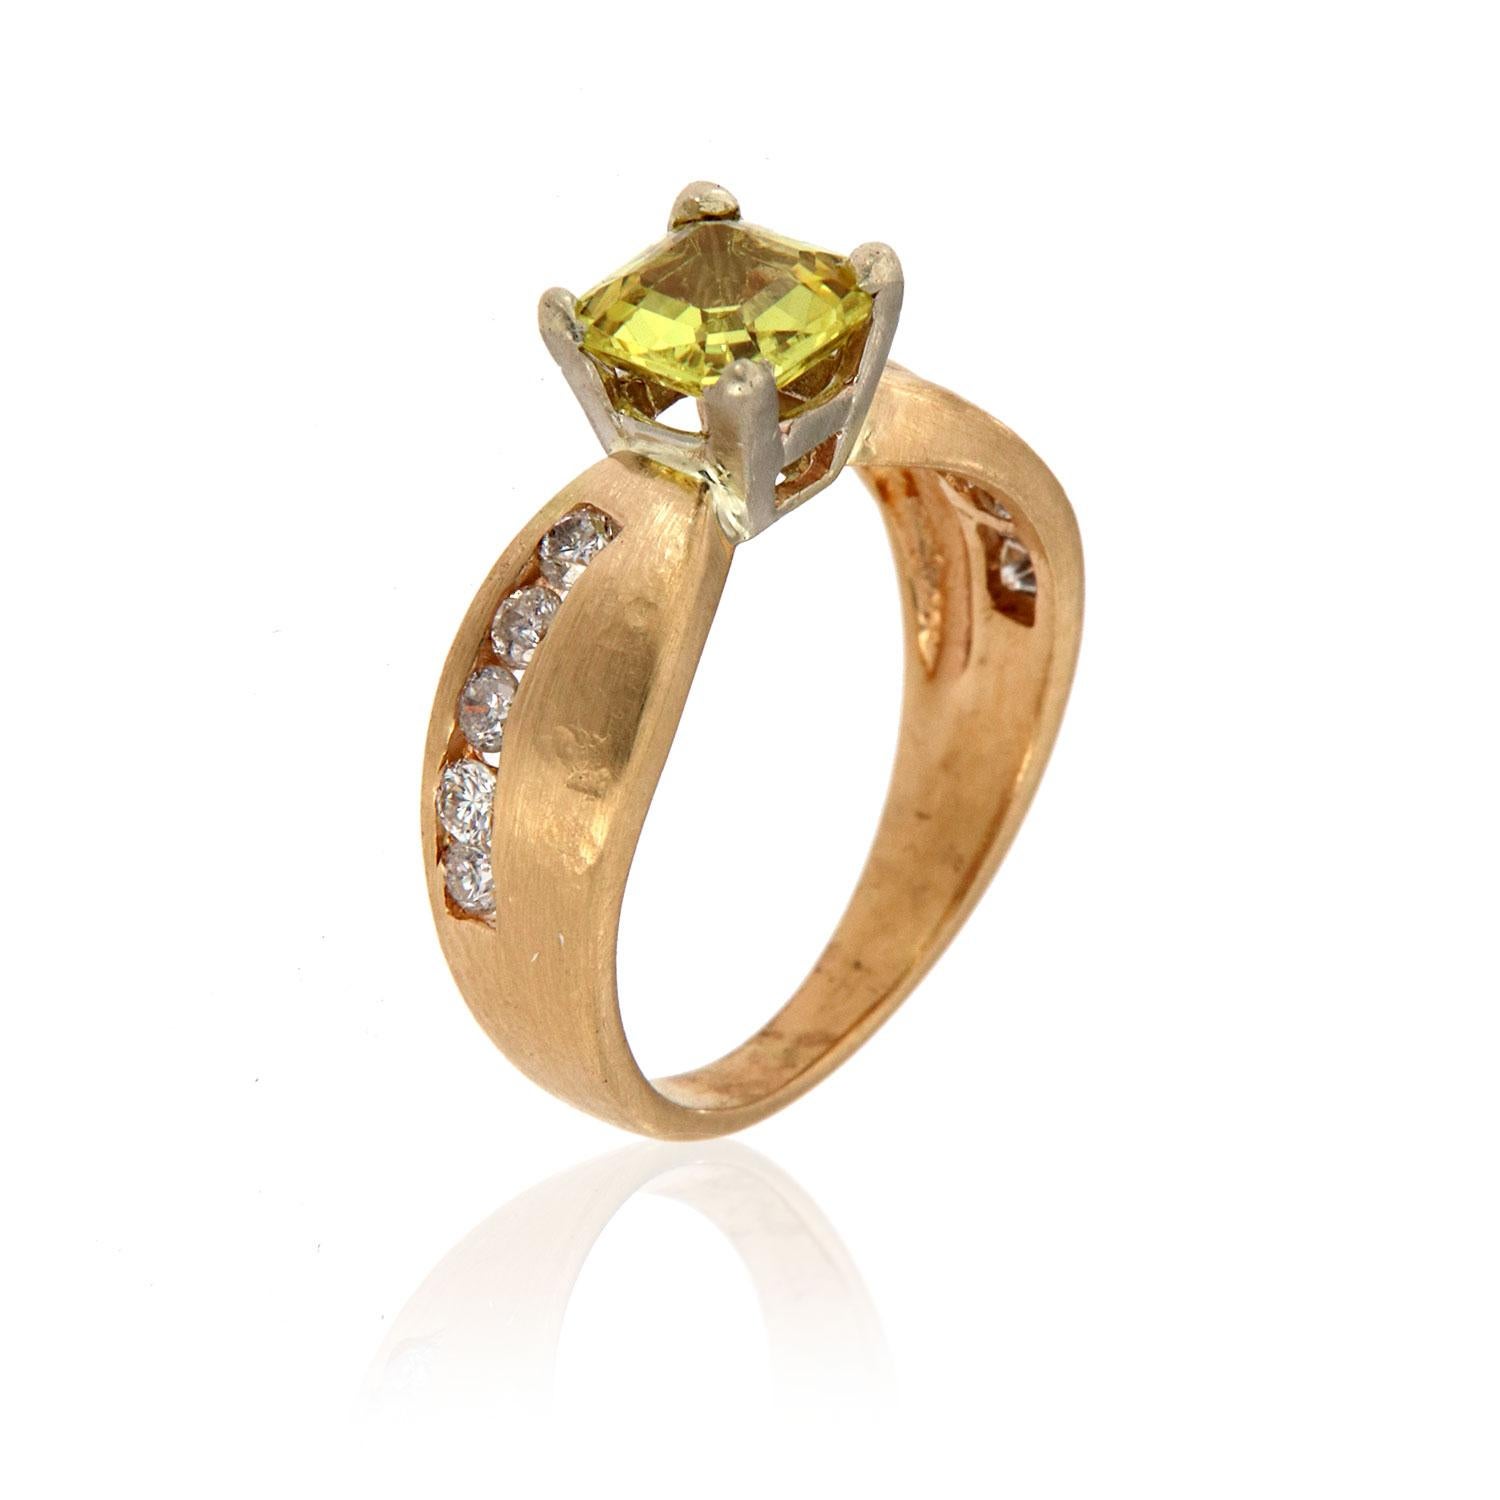 This ring features an Asscher shaped 1.15-Carat natural unheated Sri-Lankan Yellow Sapphire four (4) prong - set. A wavey row of round brilliant diamonds channel set from each side of the center gem. The slightly hammered and matte-finished bringing